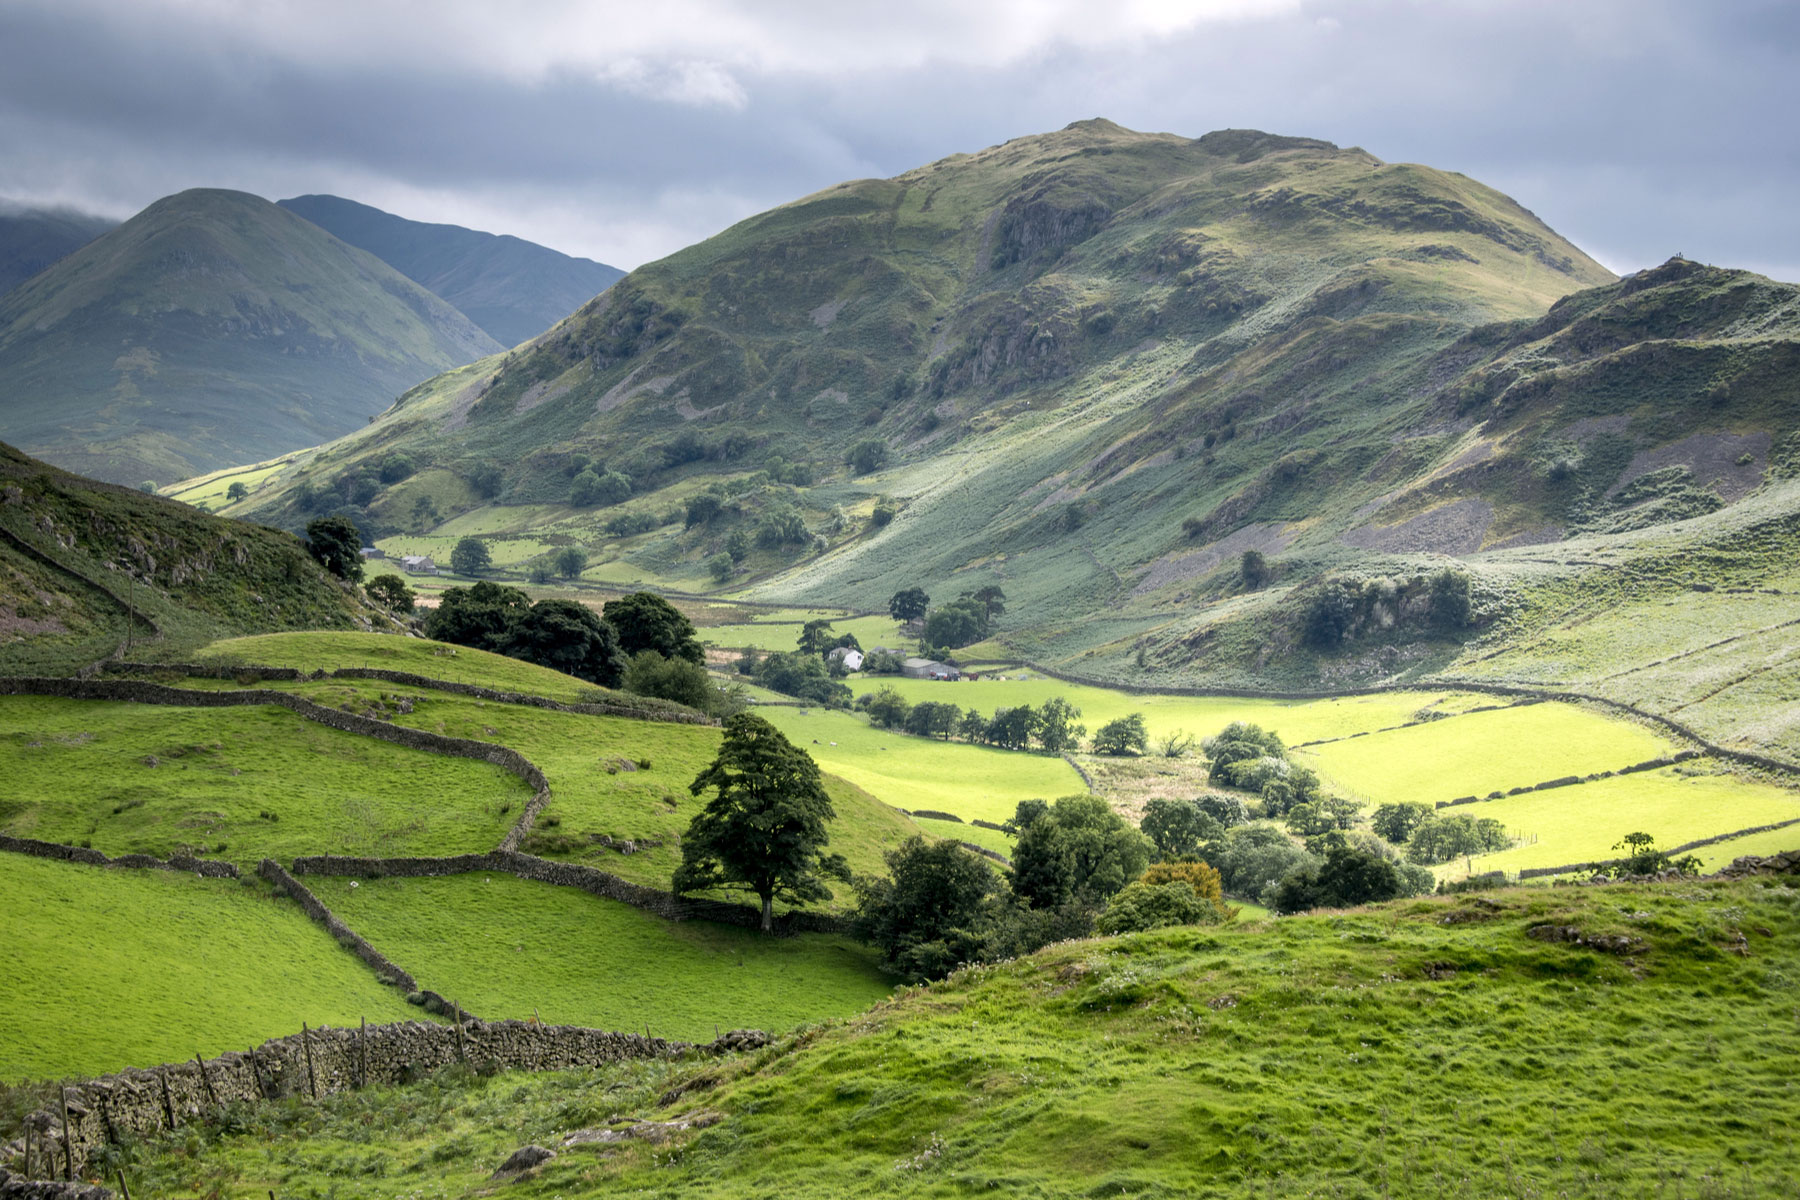 Landscapes in England's Lake District